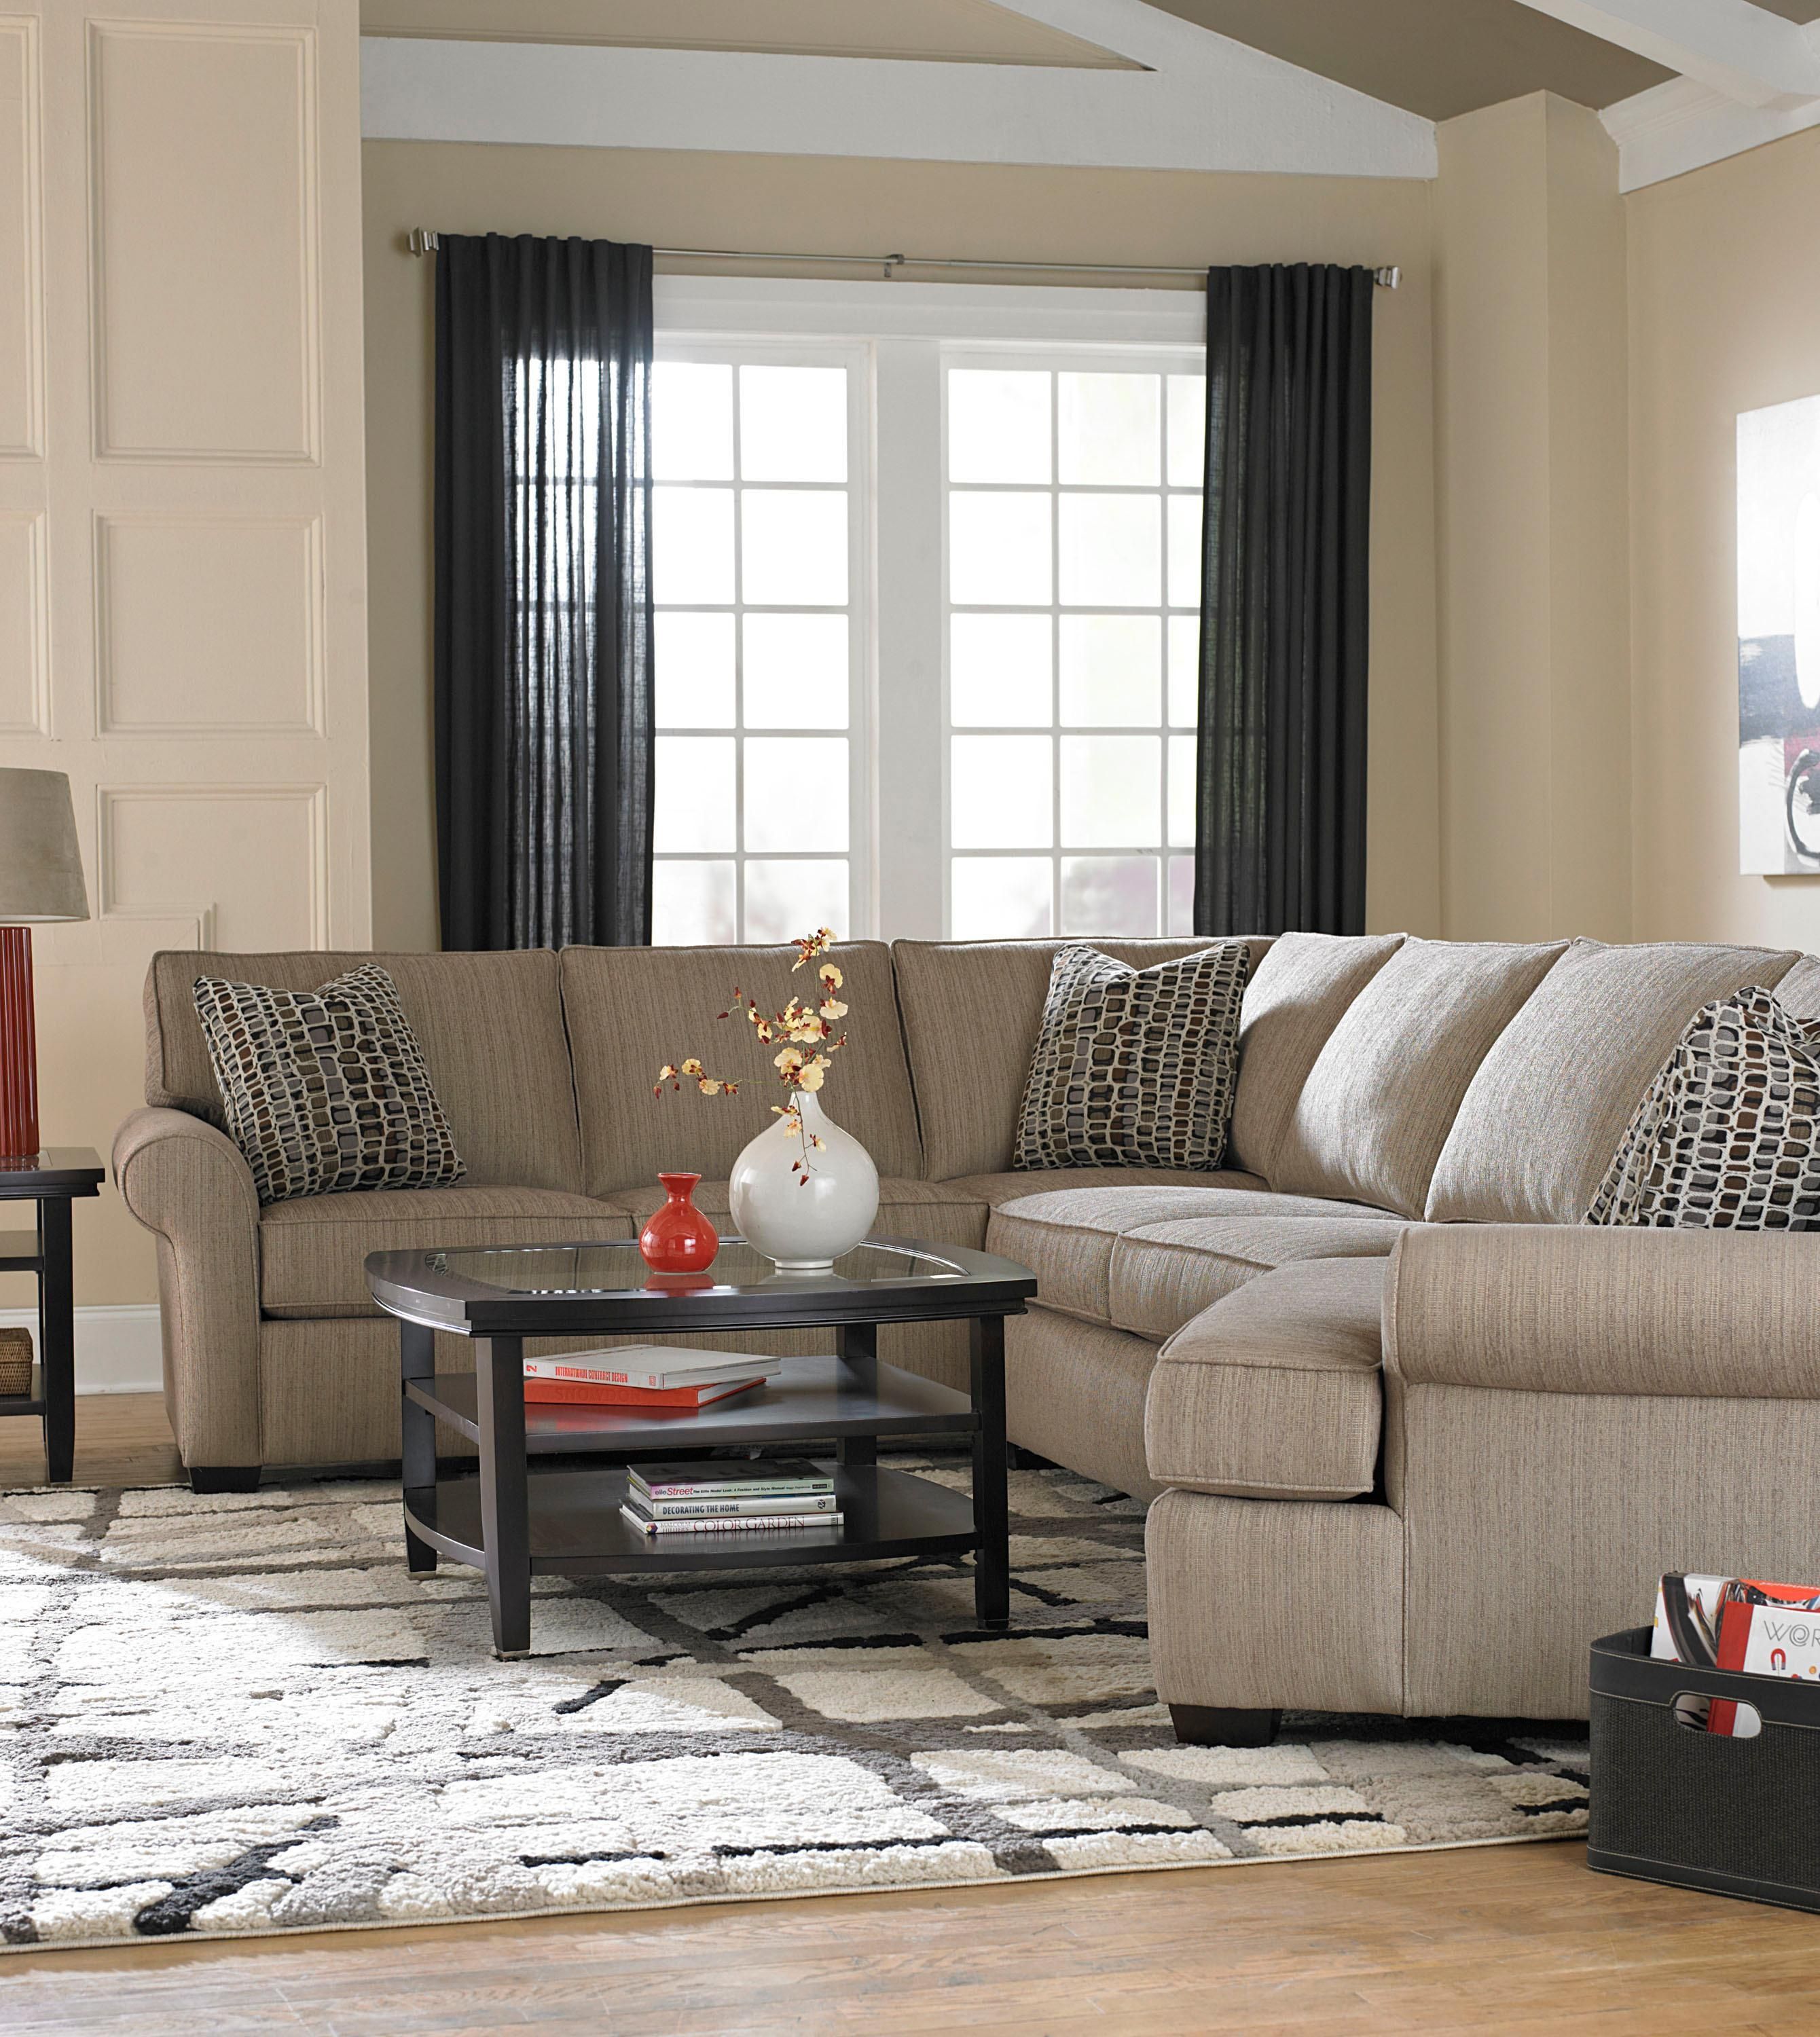 Broyhill Furniture Ethan Sectional Sofa Broyhill Of Denver In Cuddler Sectional Sofa 